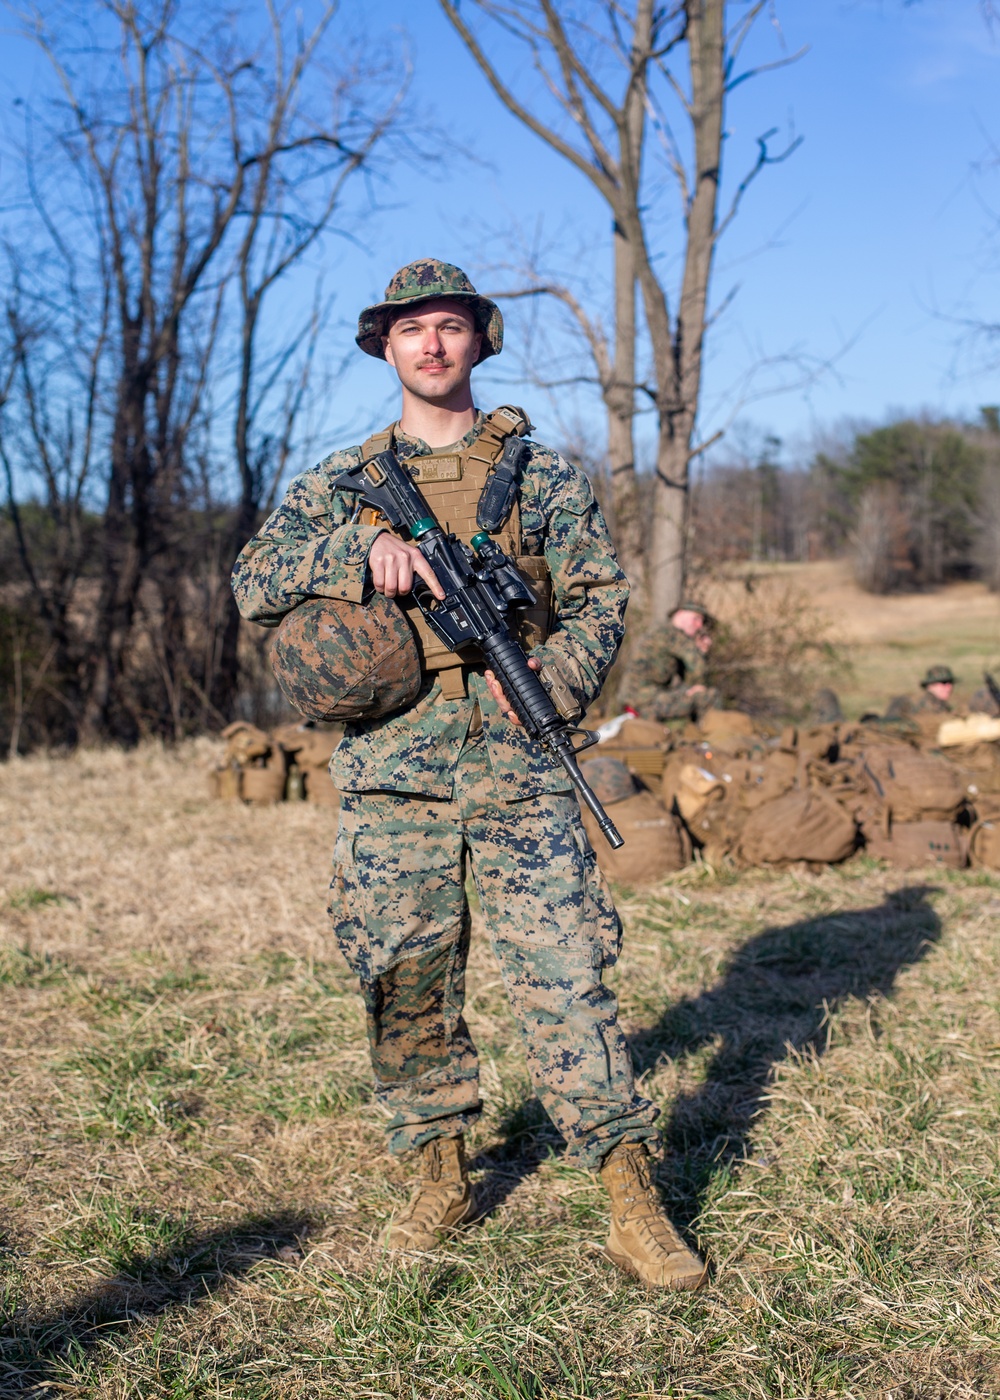 A look into the Marine Corps Reserves